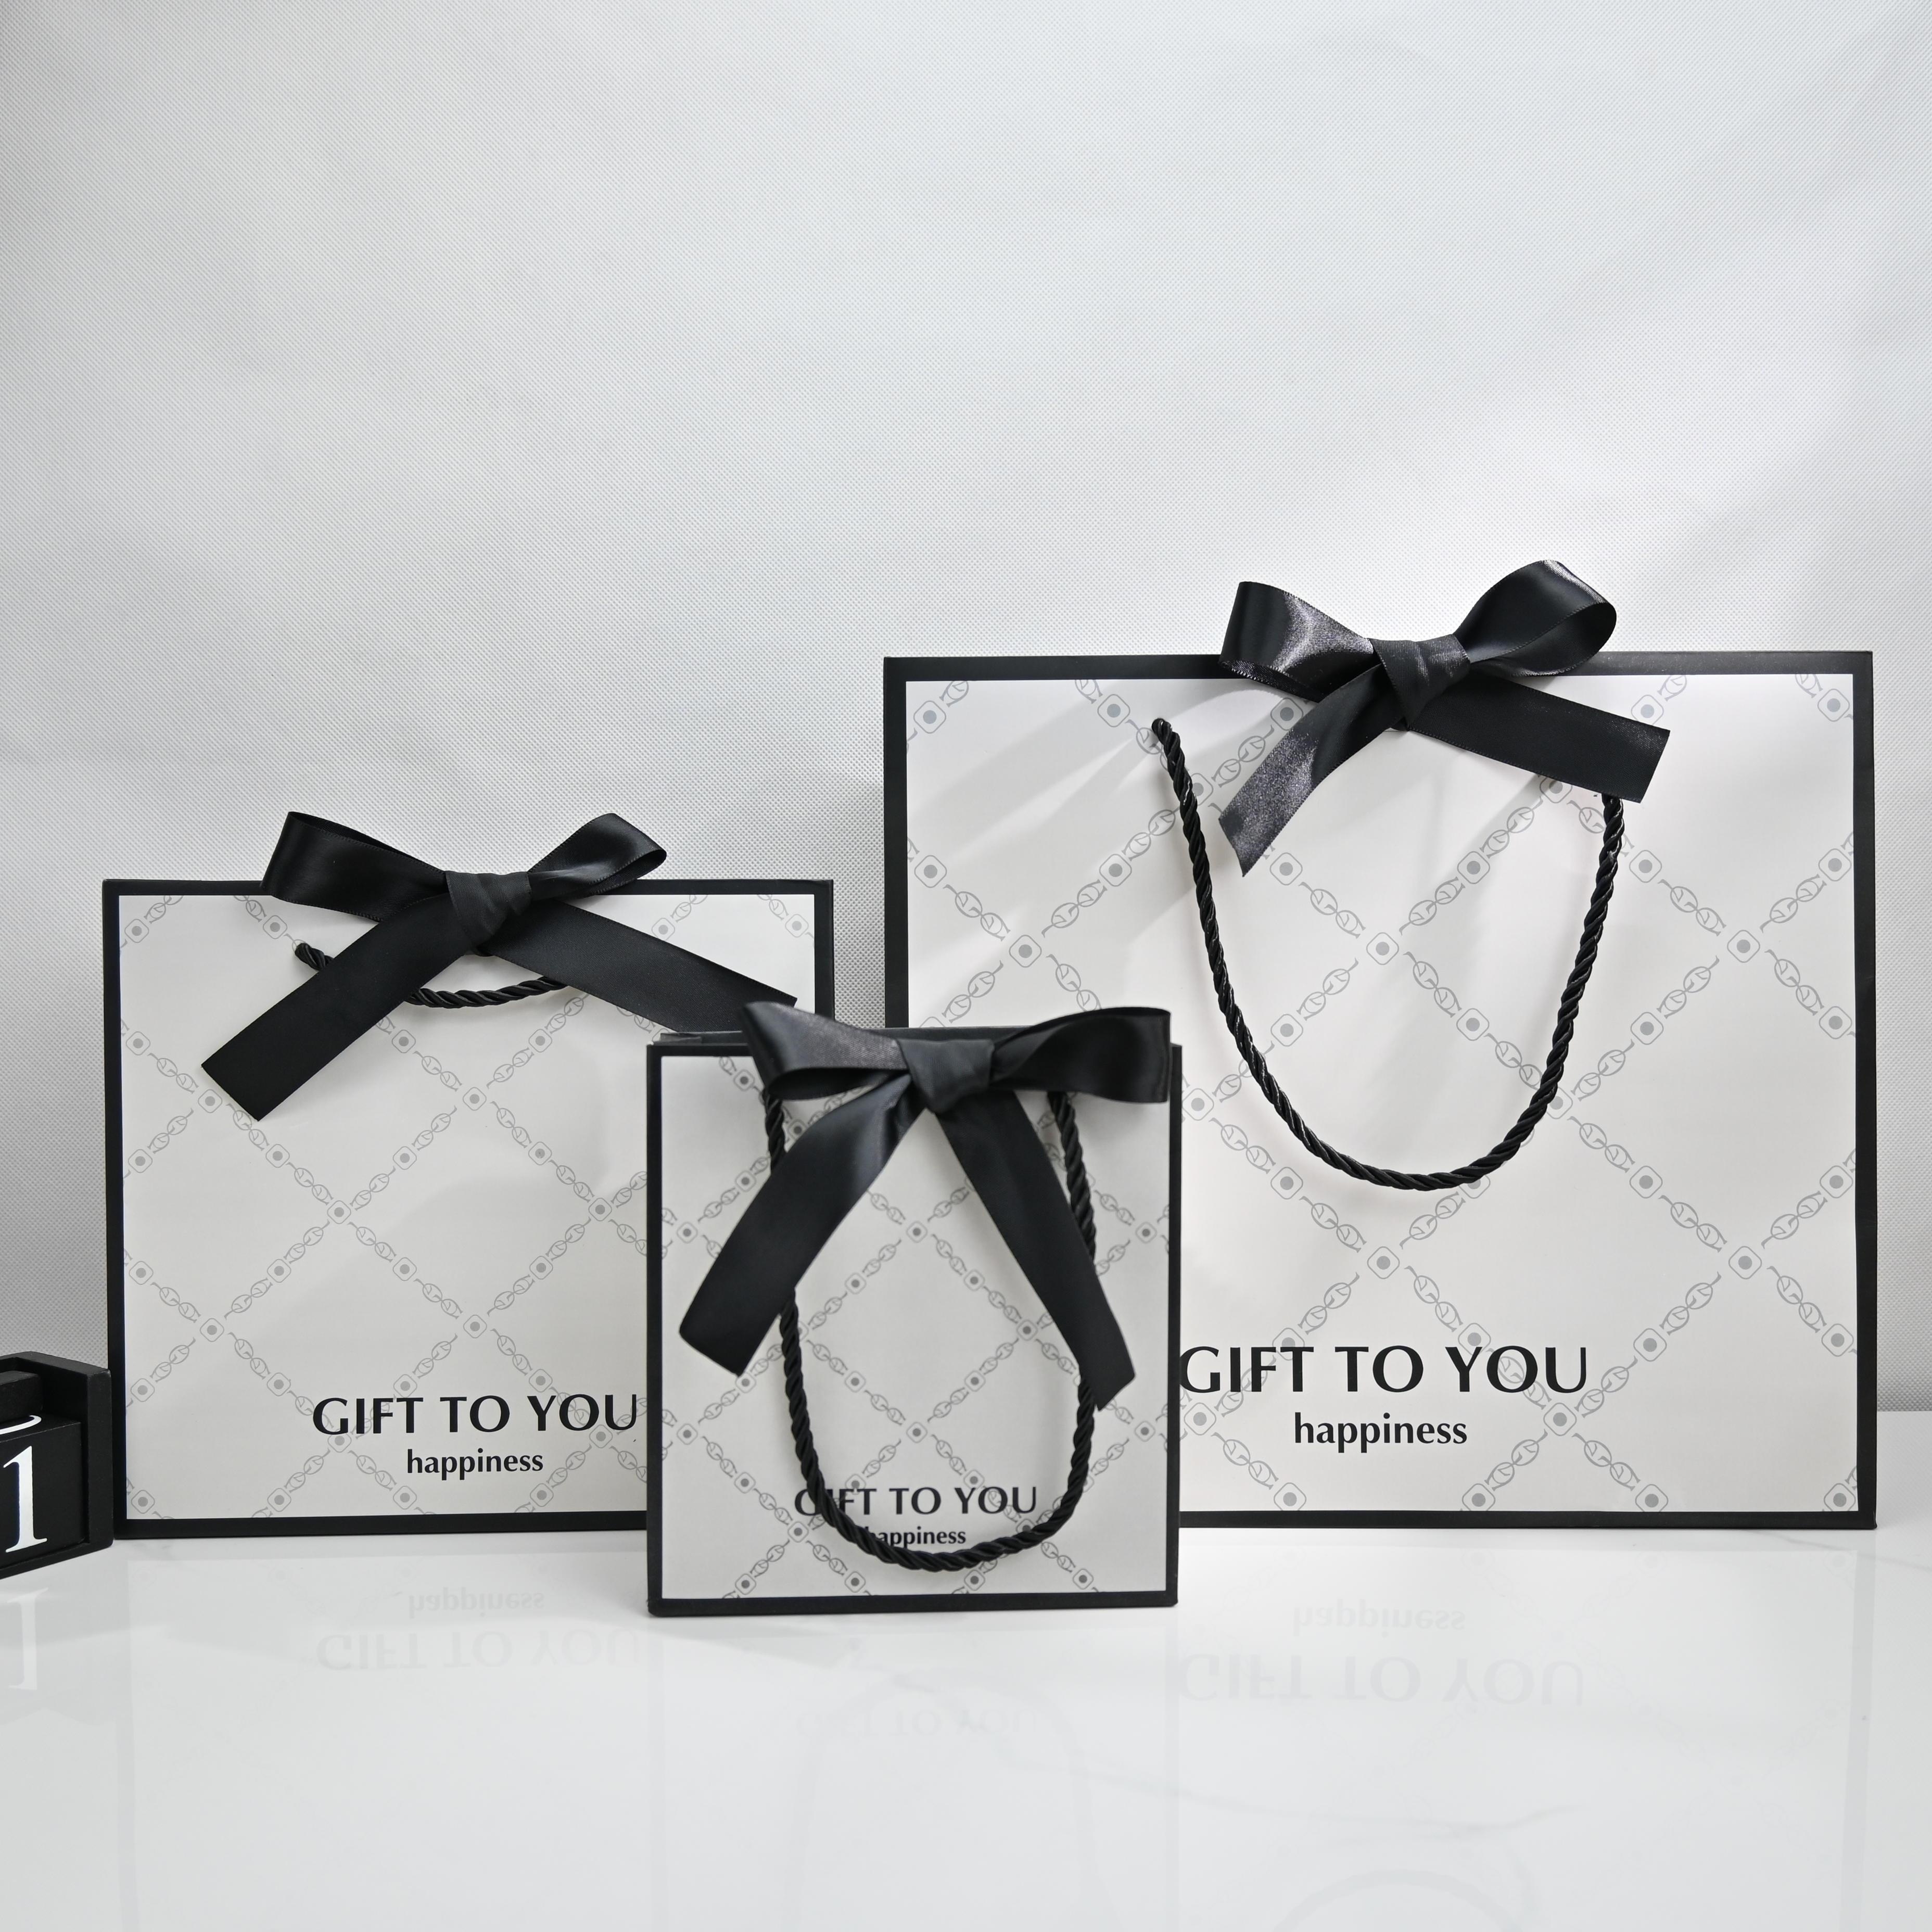 

Luxury Large Gift Bag For Husband - Elegant Black & White Striped Tote With Silk Ribbon, Perfect For Jewelry & Birthday Presents, Ideal For Men, Boyfriends, Fathers